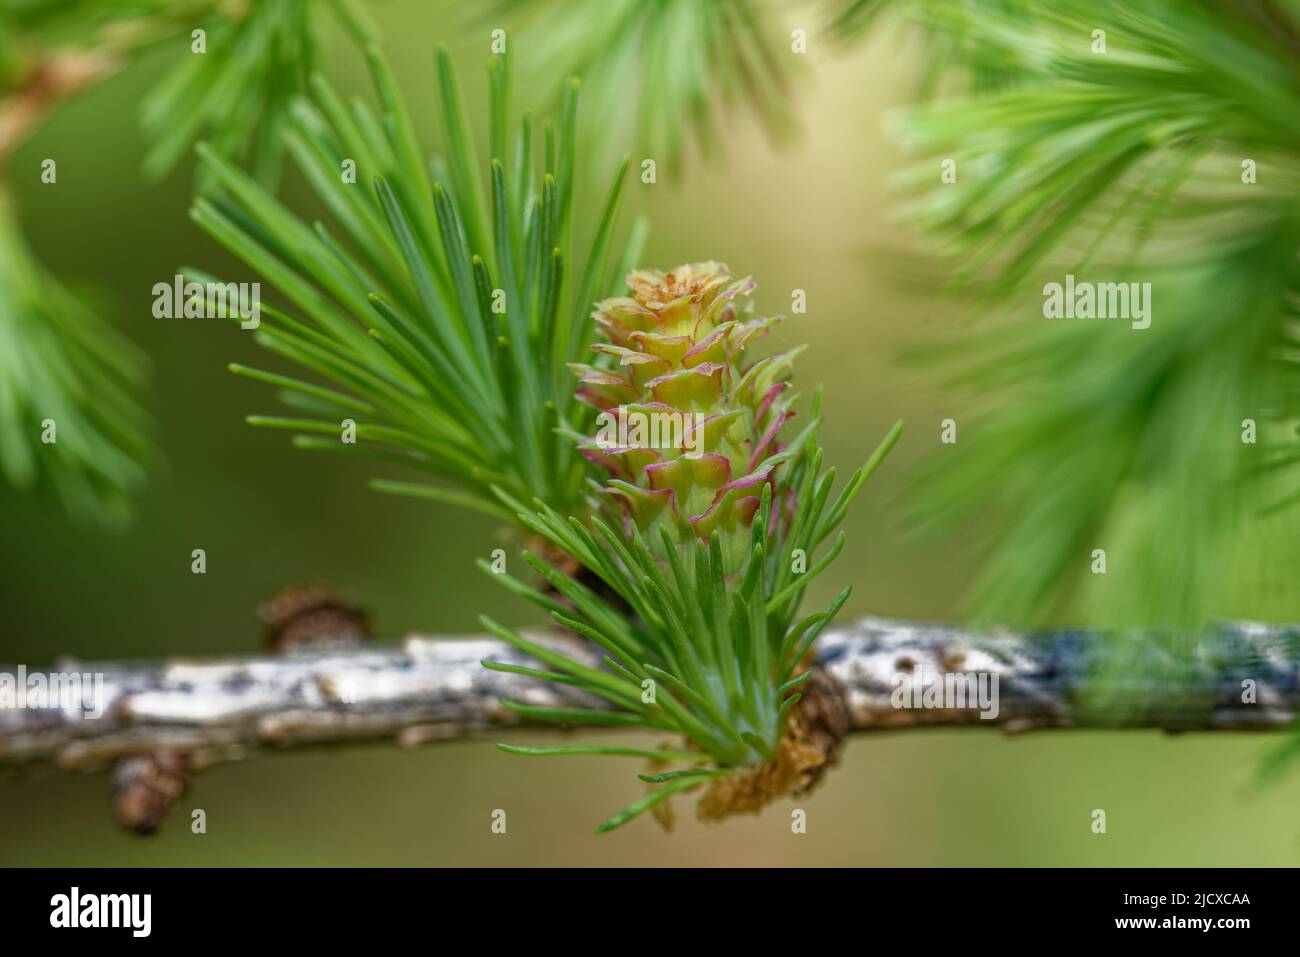 Young ovulate cone of larch tree in spring, beginning of June. Stock Photo